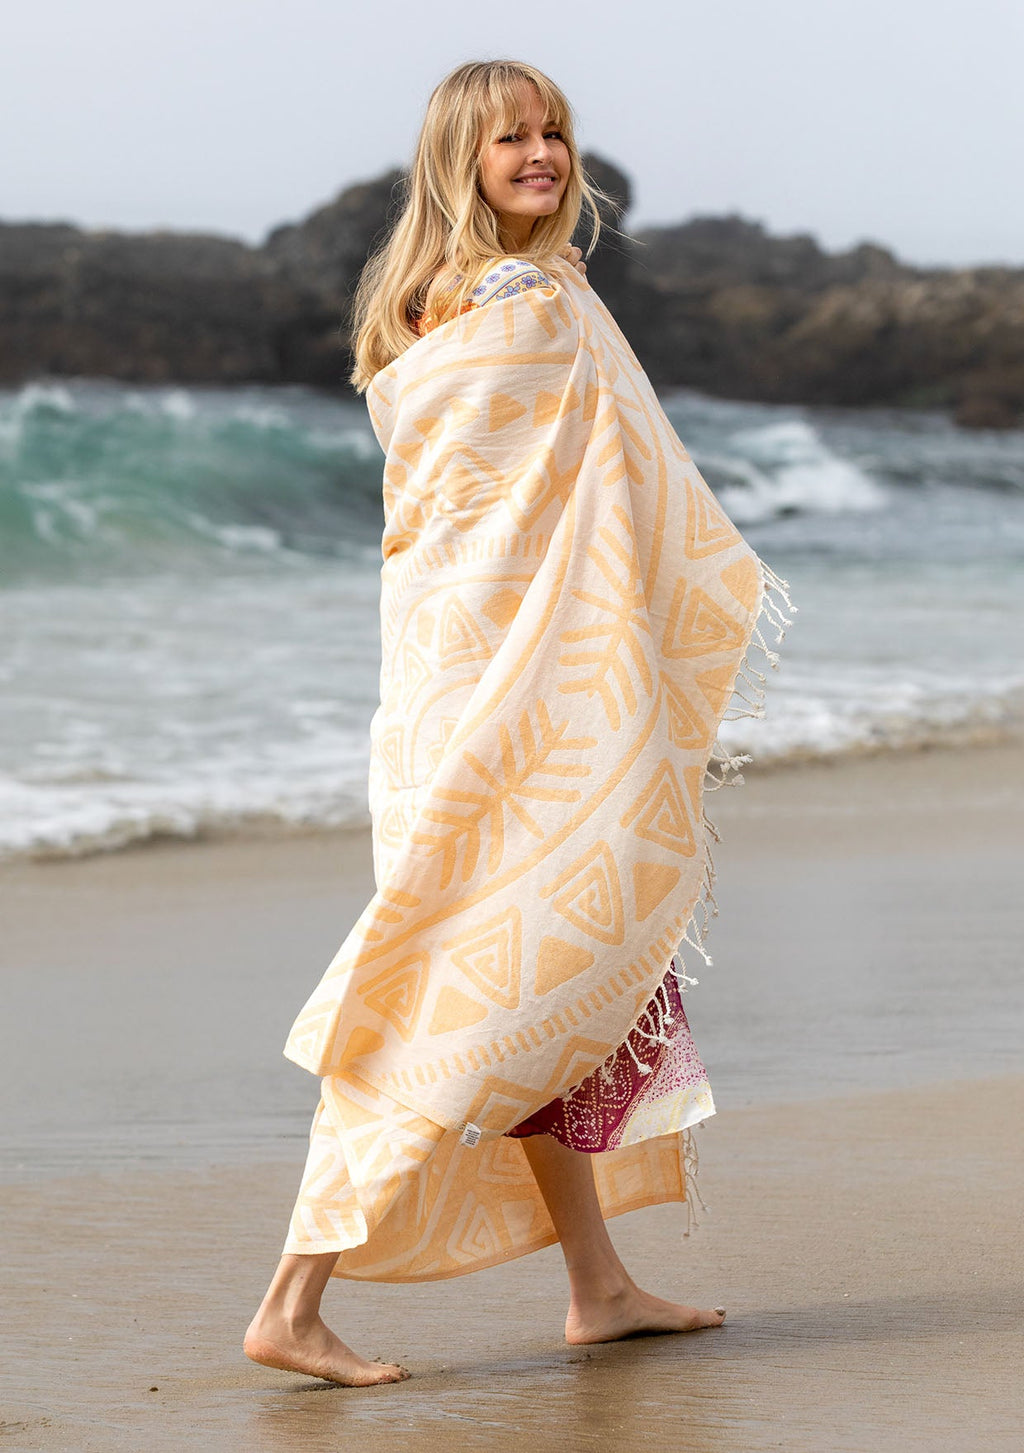 Beach Collection, Cotton Beach Towels